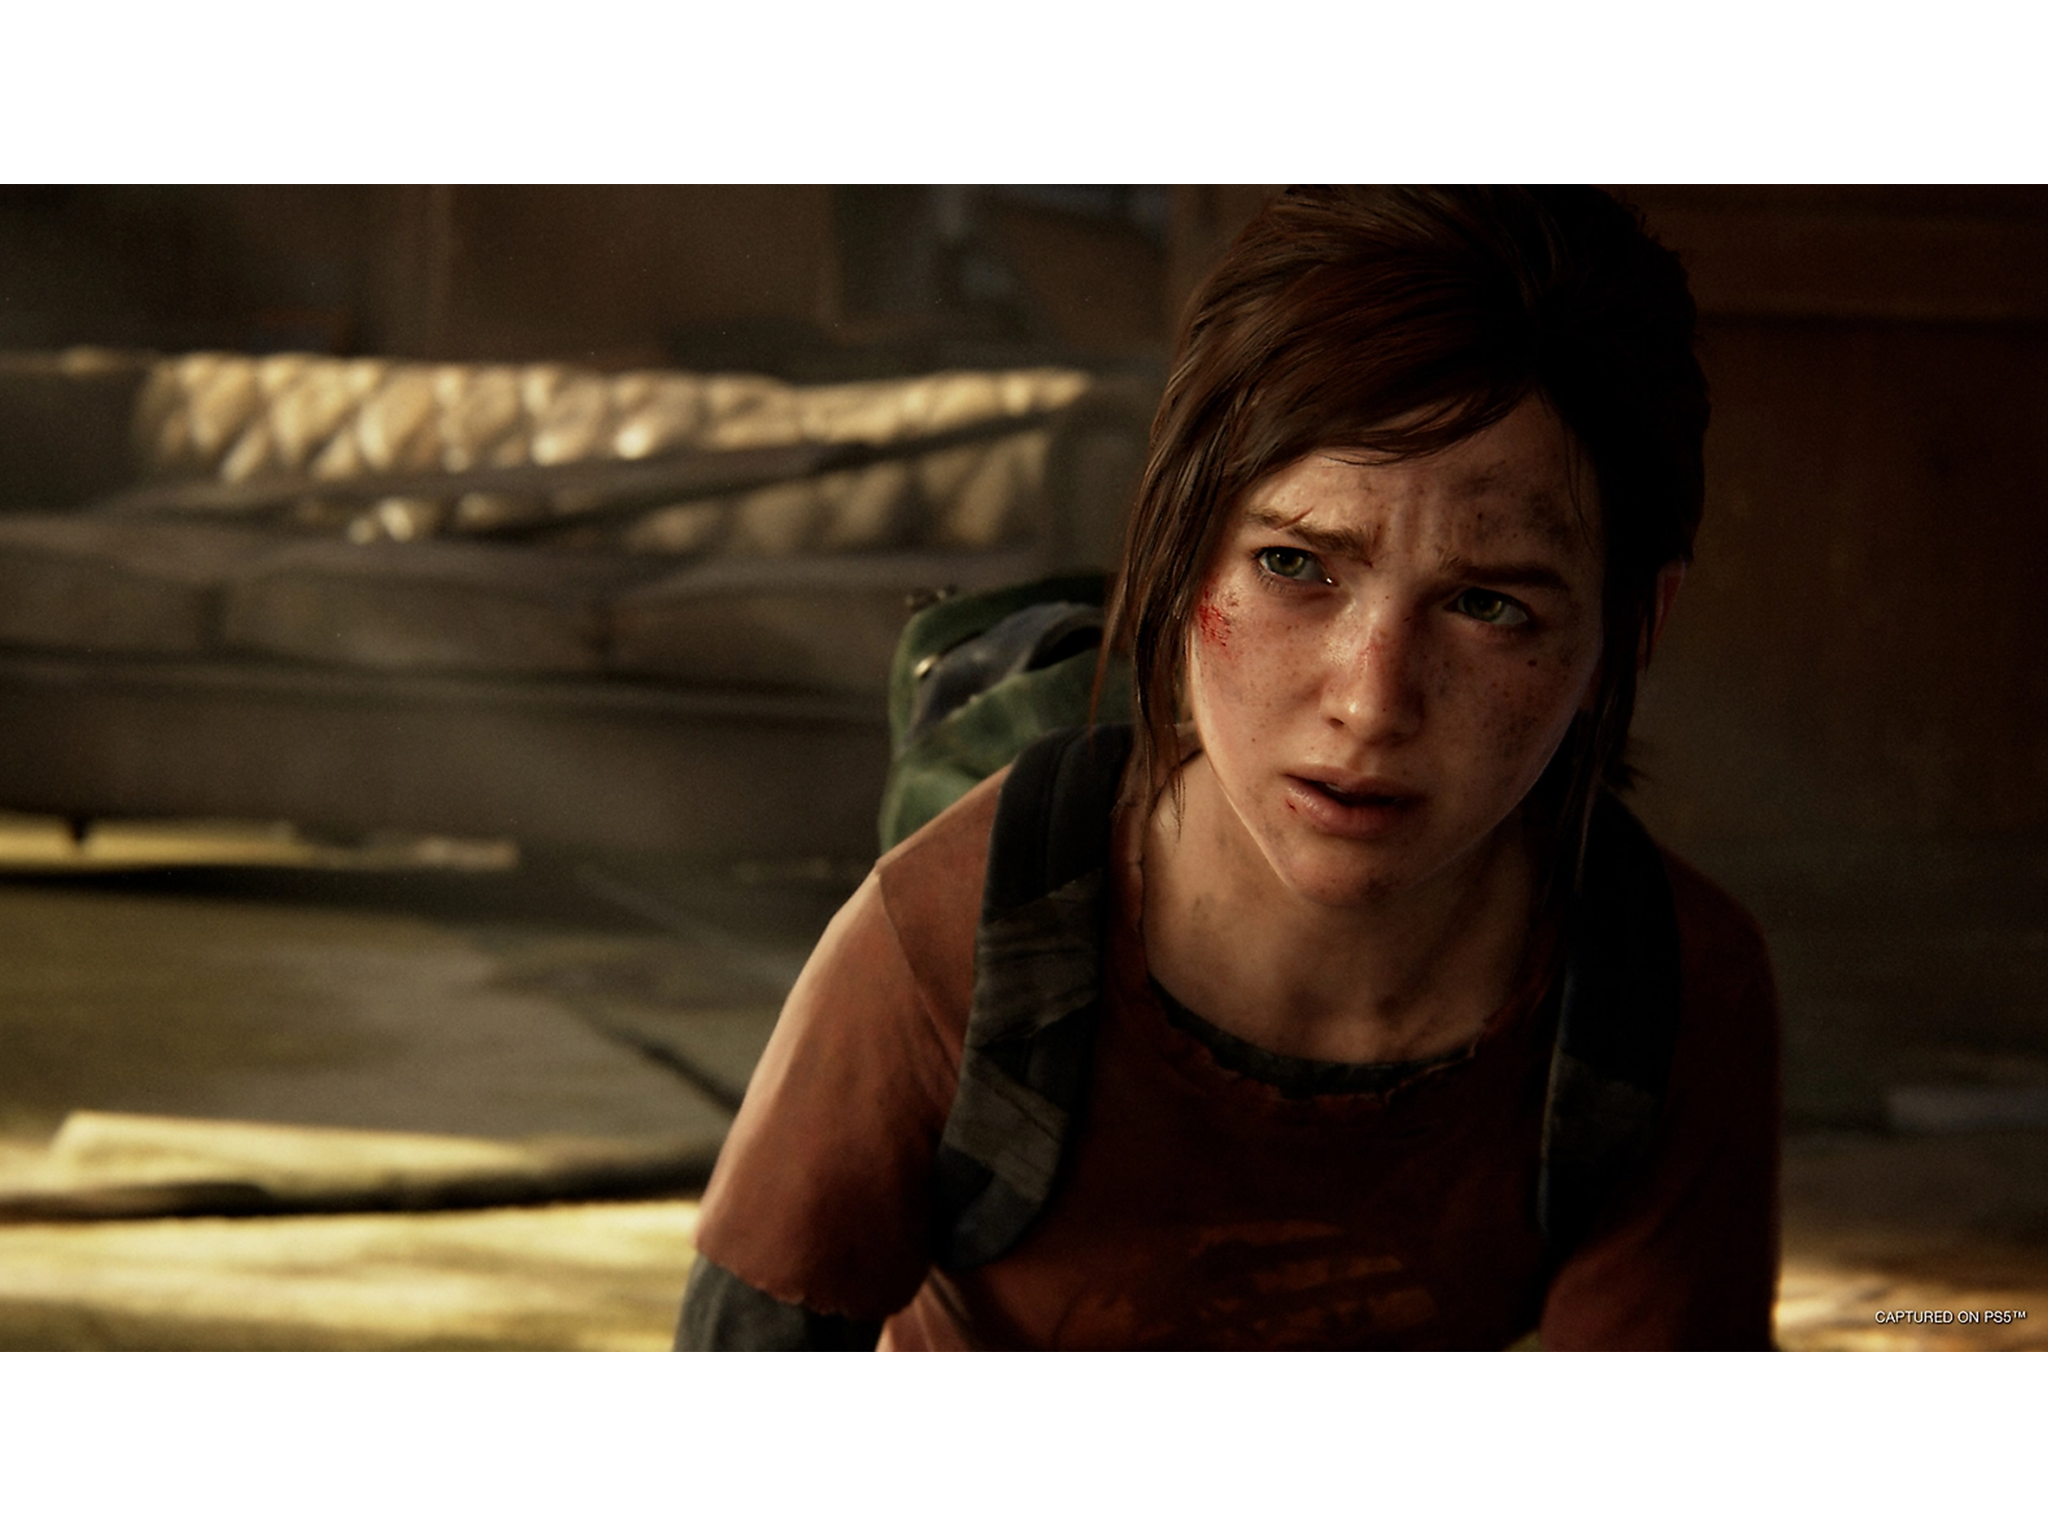 The Last of Us Part 1 for PS5 adds new HBO t-shirts for Ellie